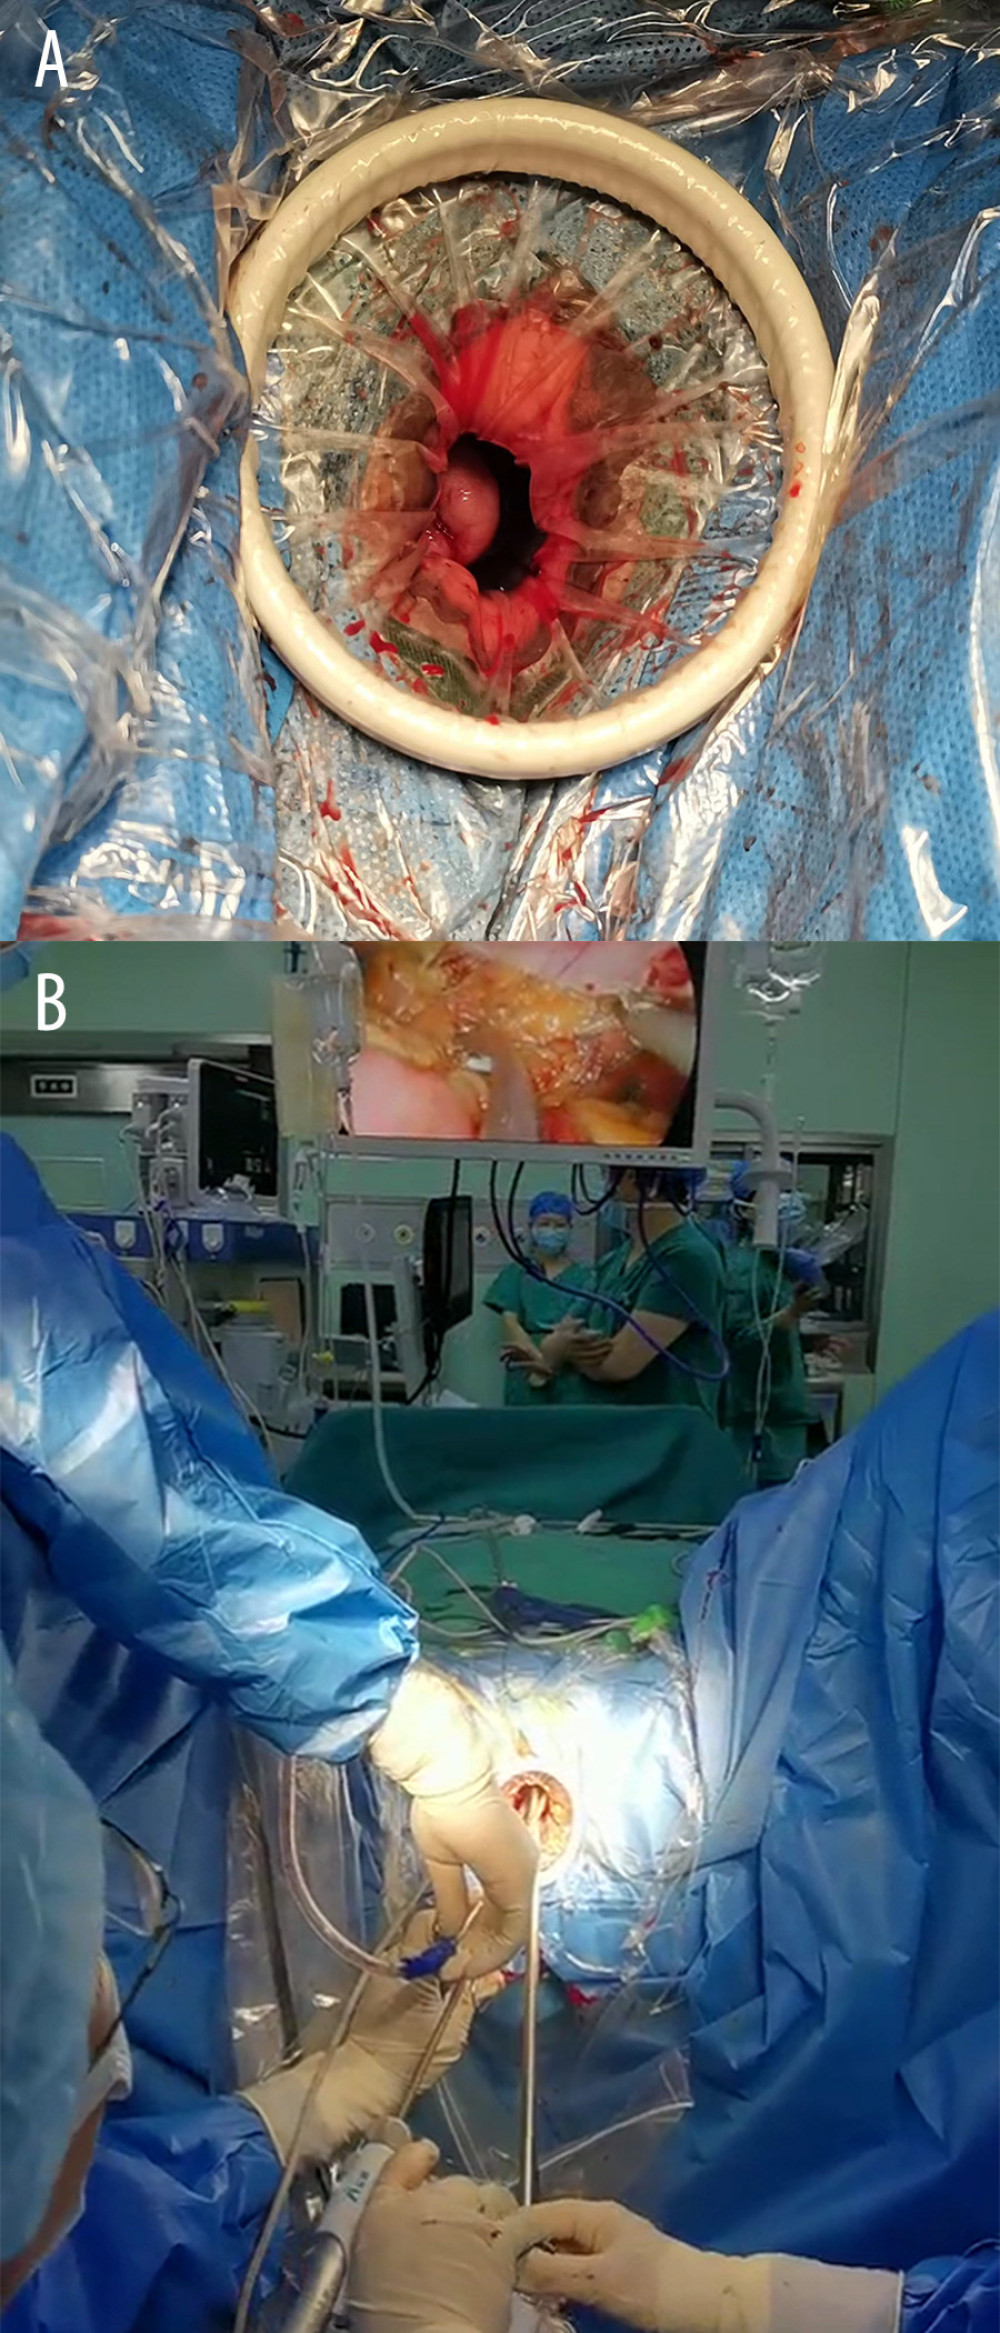 The transvaginal natural orifice transluminal endoscopic surgery (tvNOTES) operating platform. (A) The tvNOTES port was inserted through the vagina into the peritoneal cavity, but the sealing cap of the port was not installed. (B) Instruments were easy to access, and the assistant surgeon could assist the chief surgeon through the port directly. The monitor was placed in front of the chief surgeon.